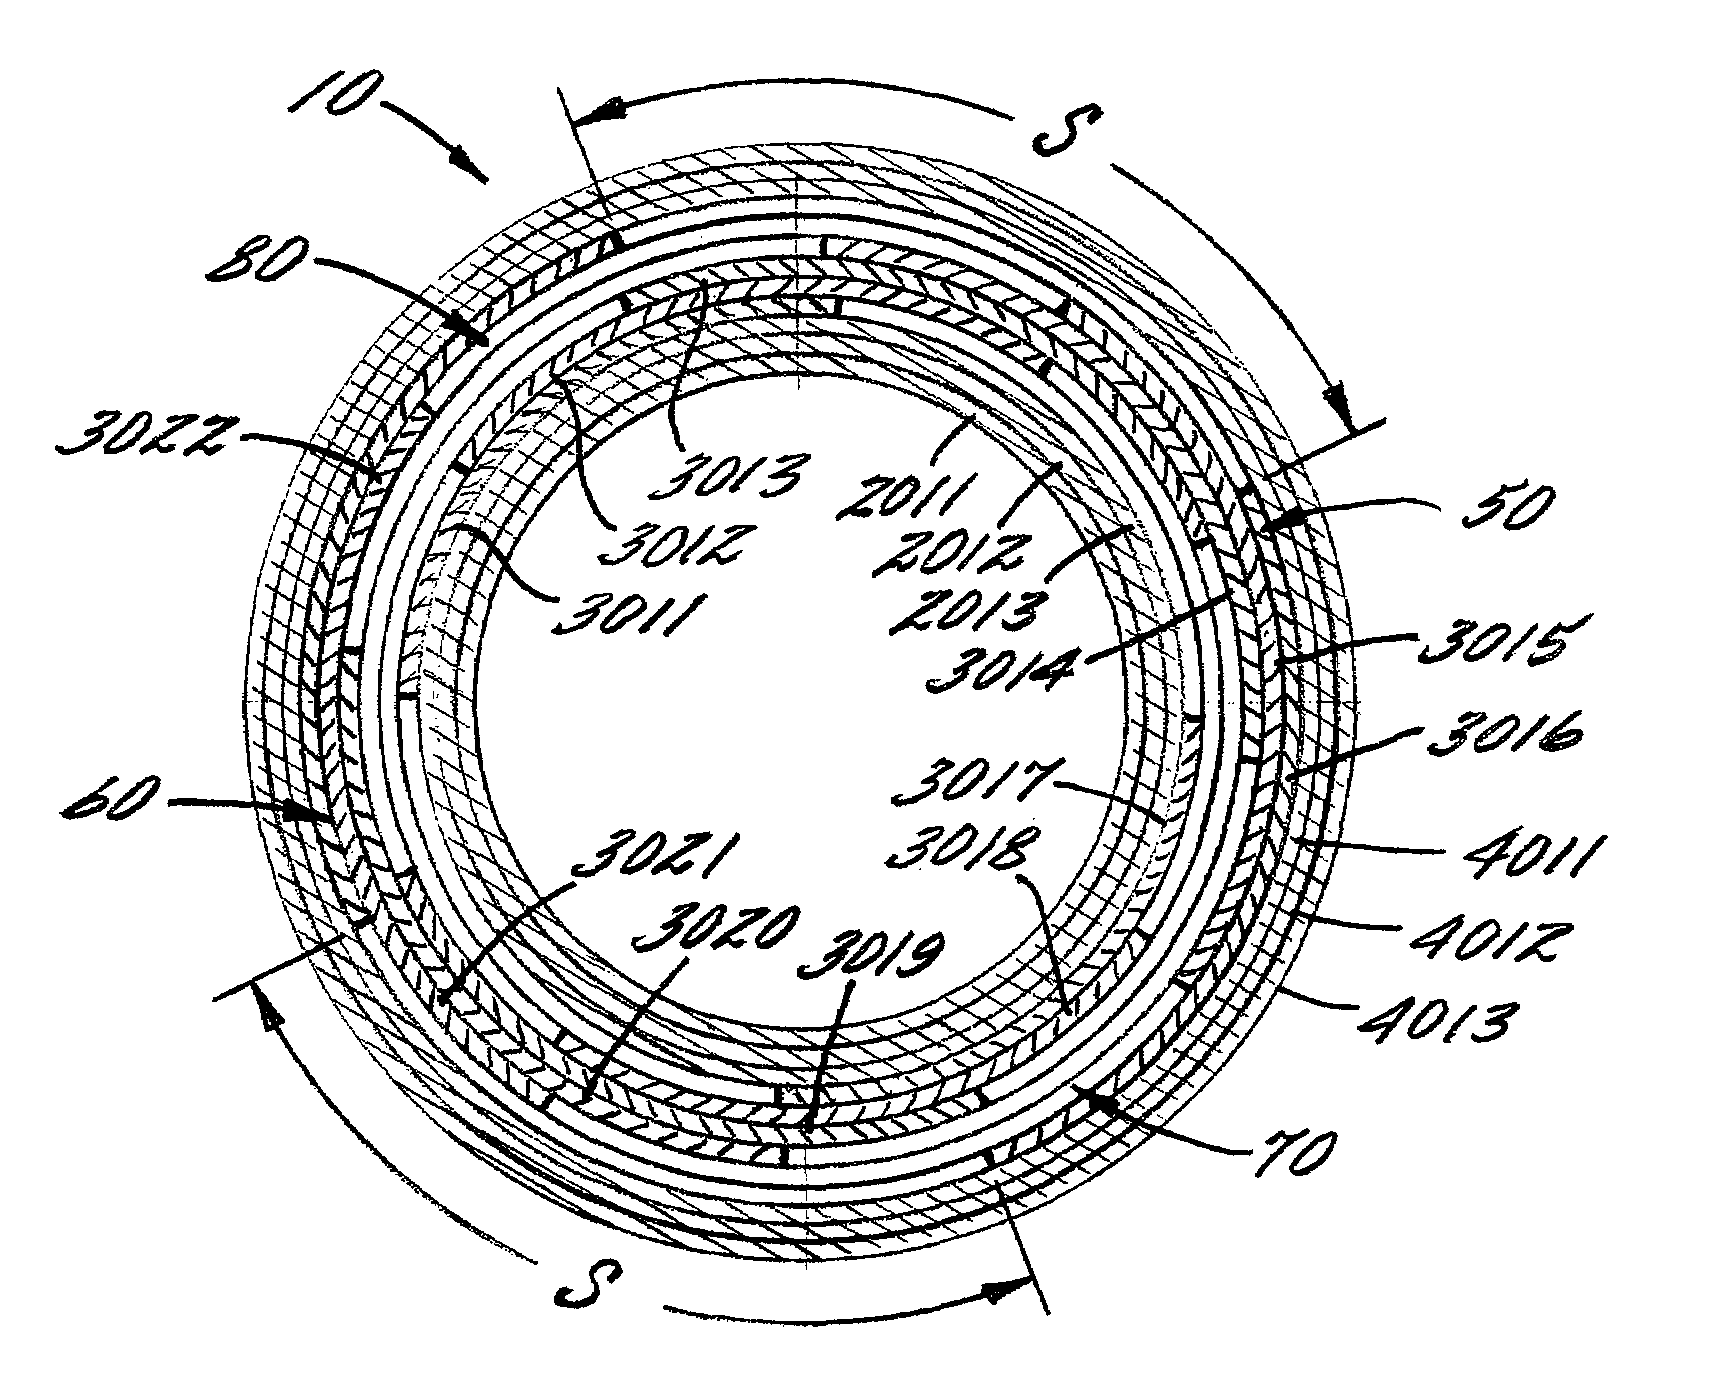 Spirally wound tube with voids and method for manufacturing the same